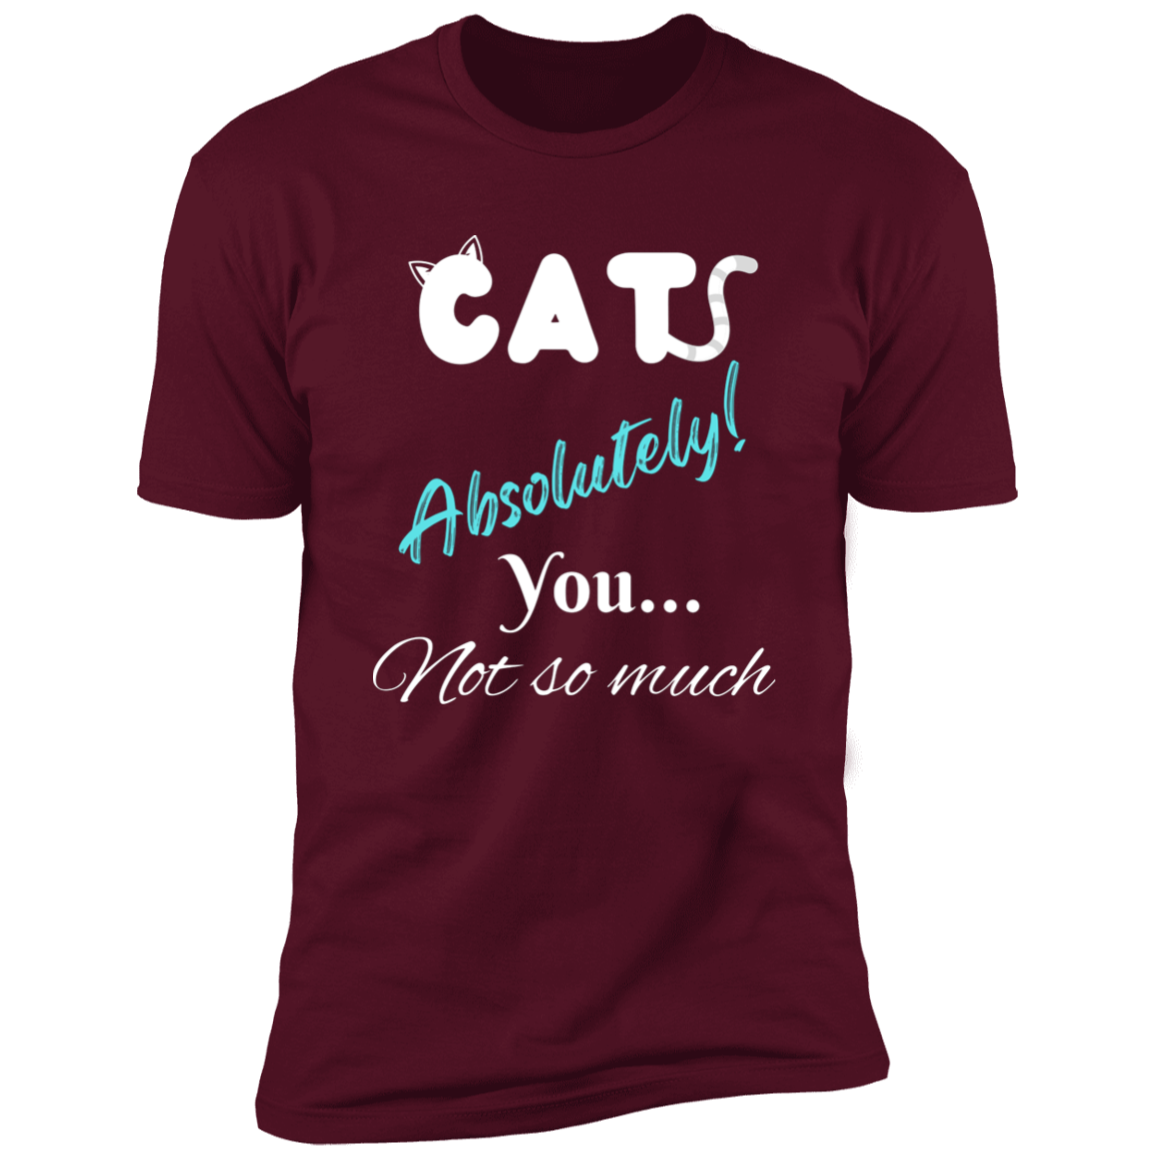 Cats Absolutely You Not So Much T-shirt, Cat Shirt for humans , in maroon